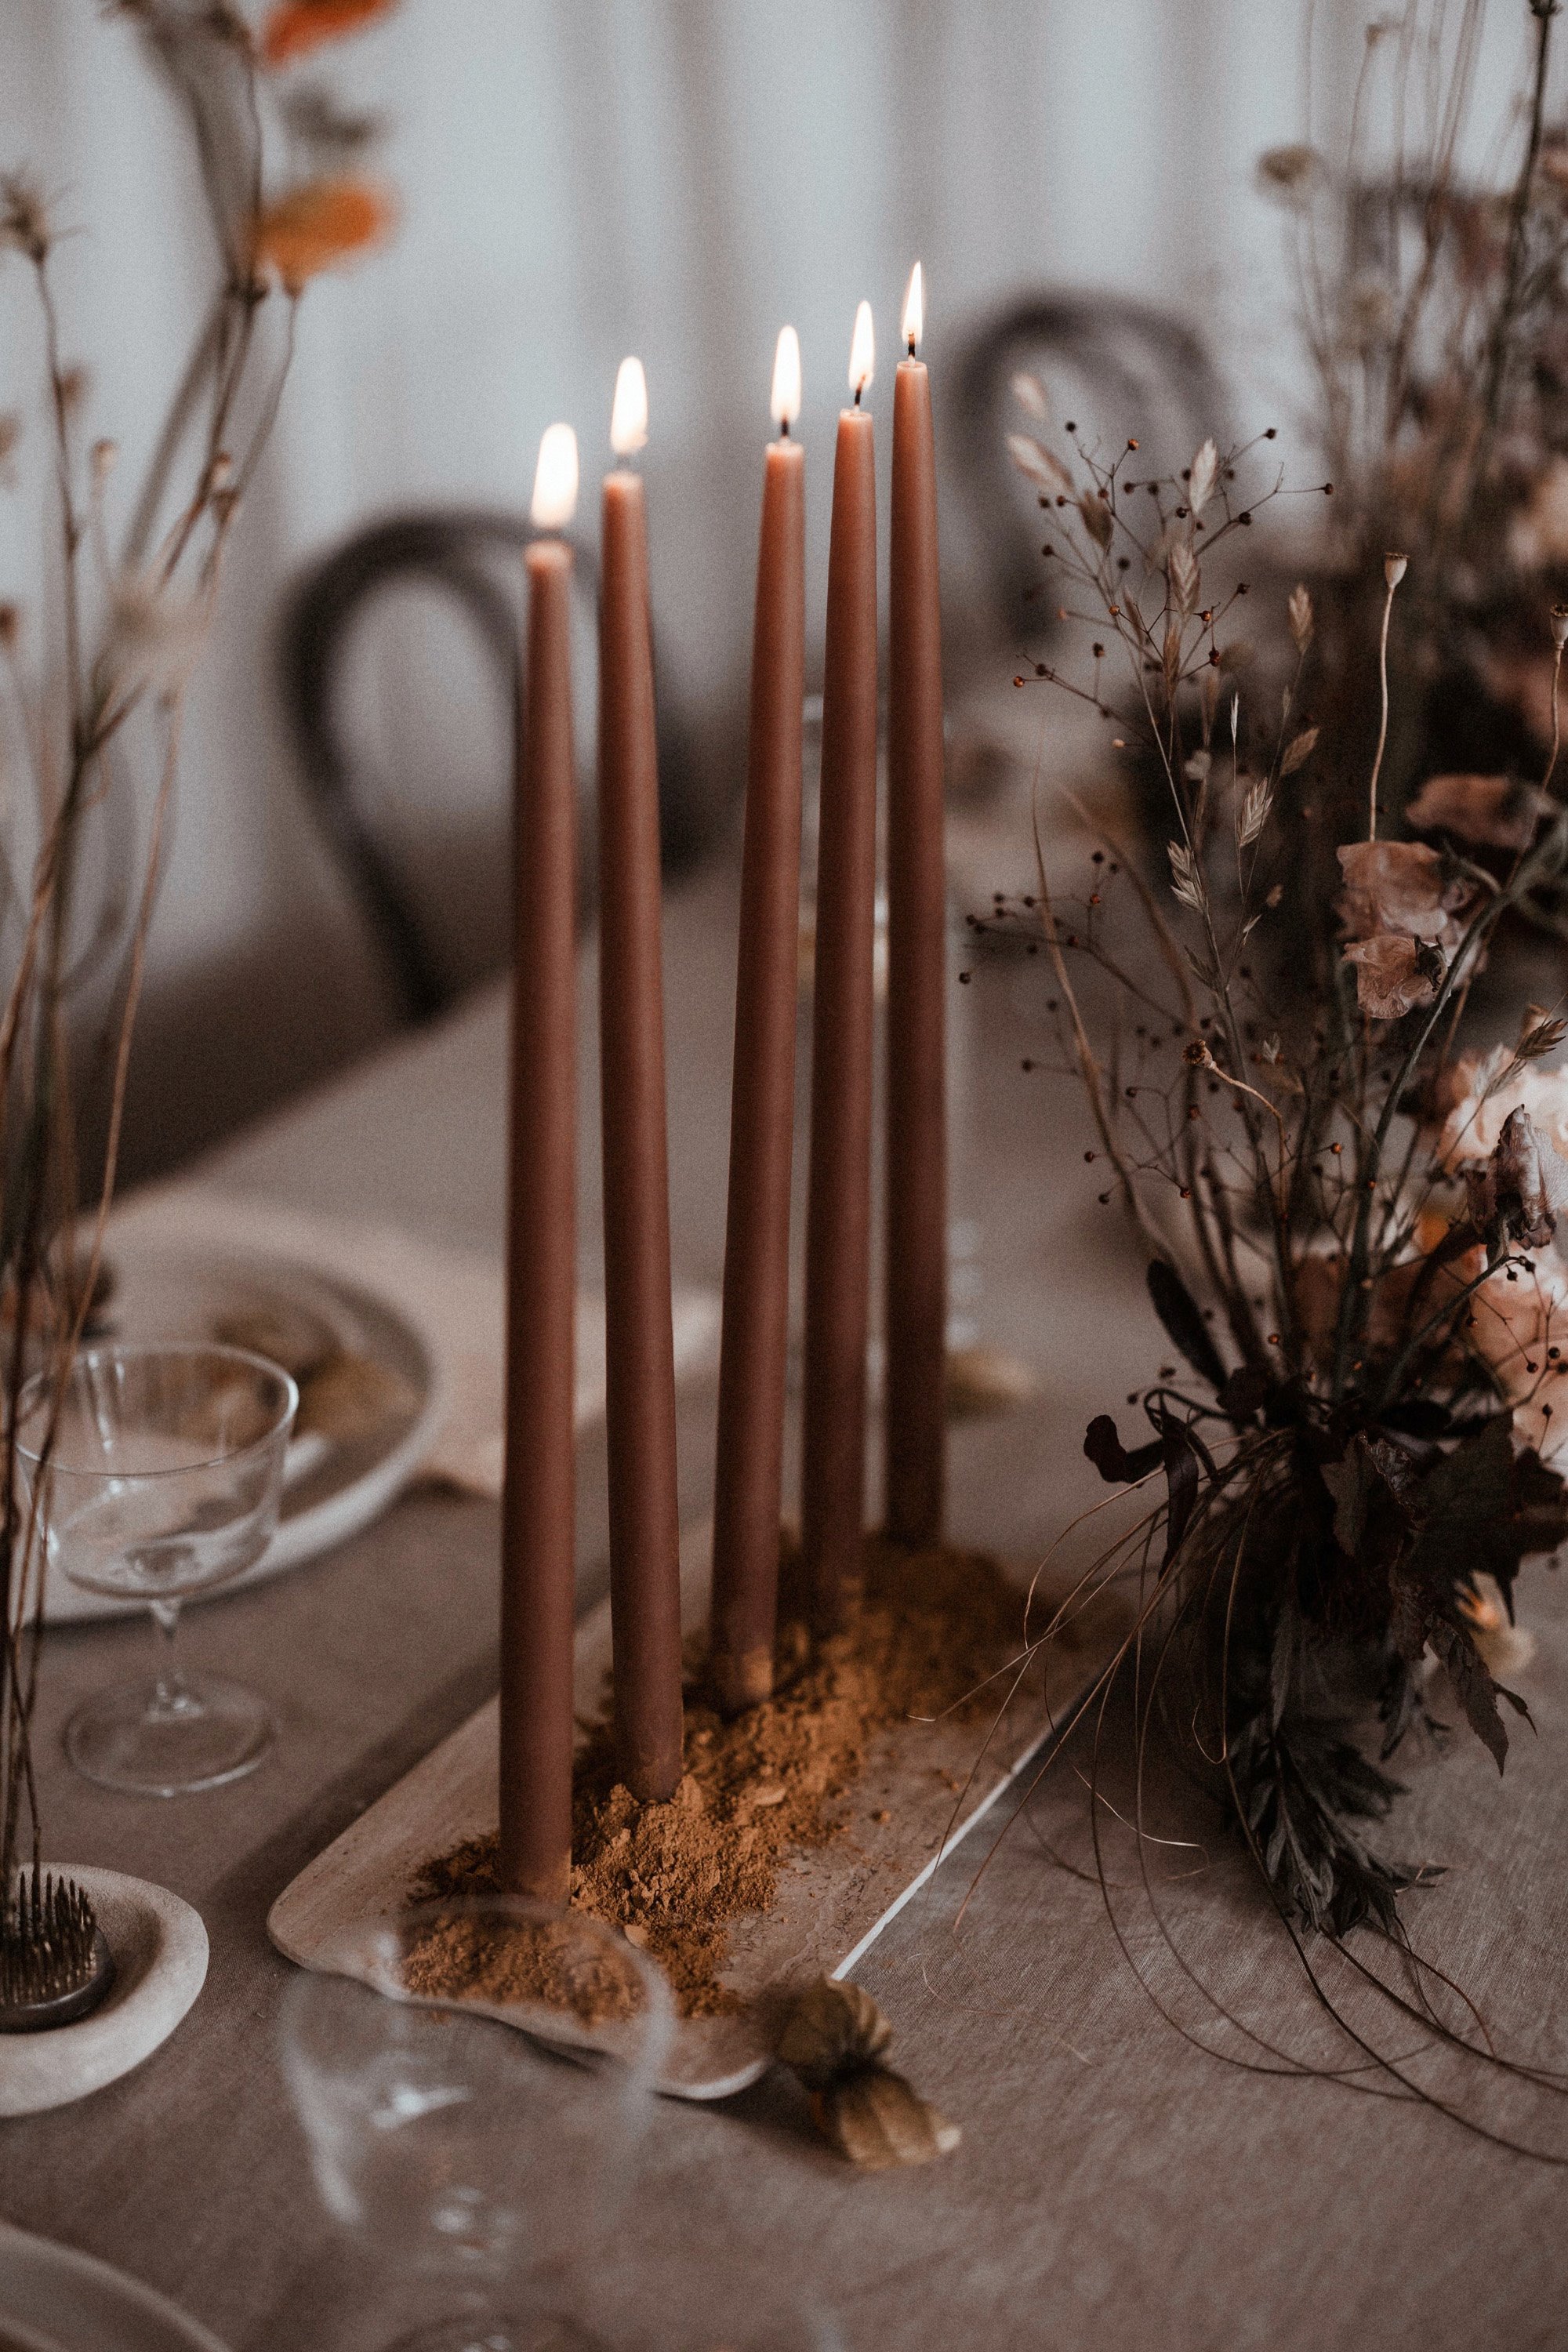 Boho luxe wedding reception tables with real candles and natural details inspired by rewilding